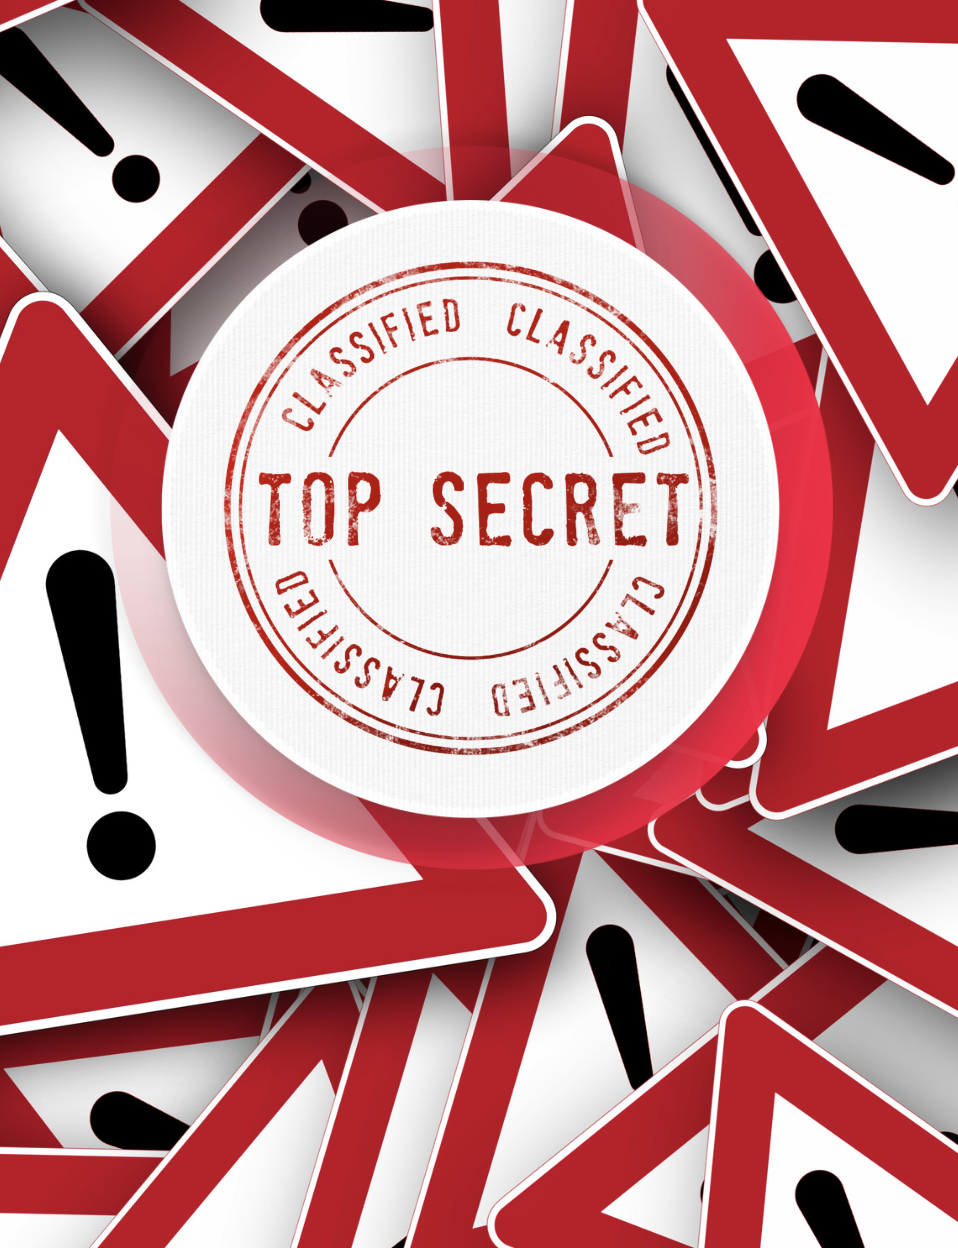 TOP SECRET: A Safe Place for Stories for Young Writers